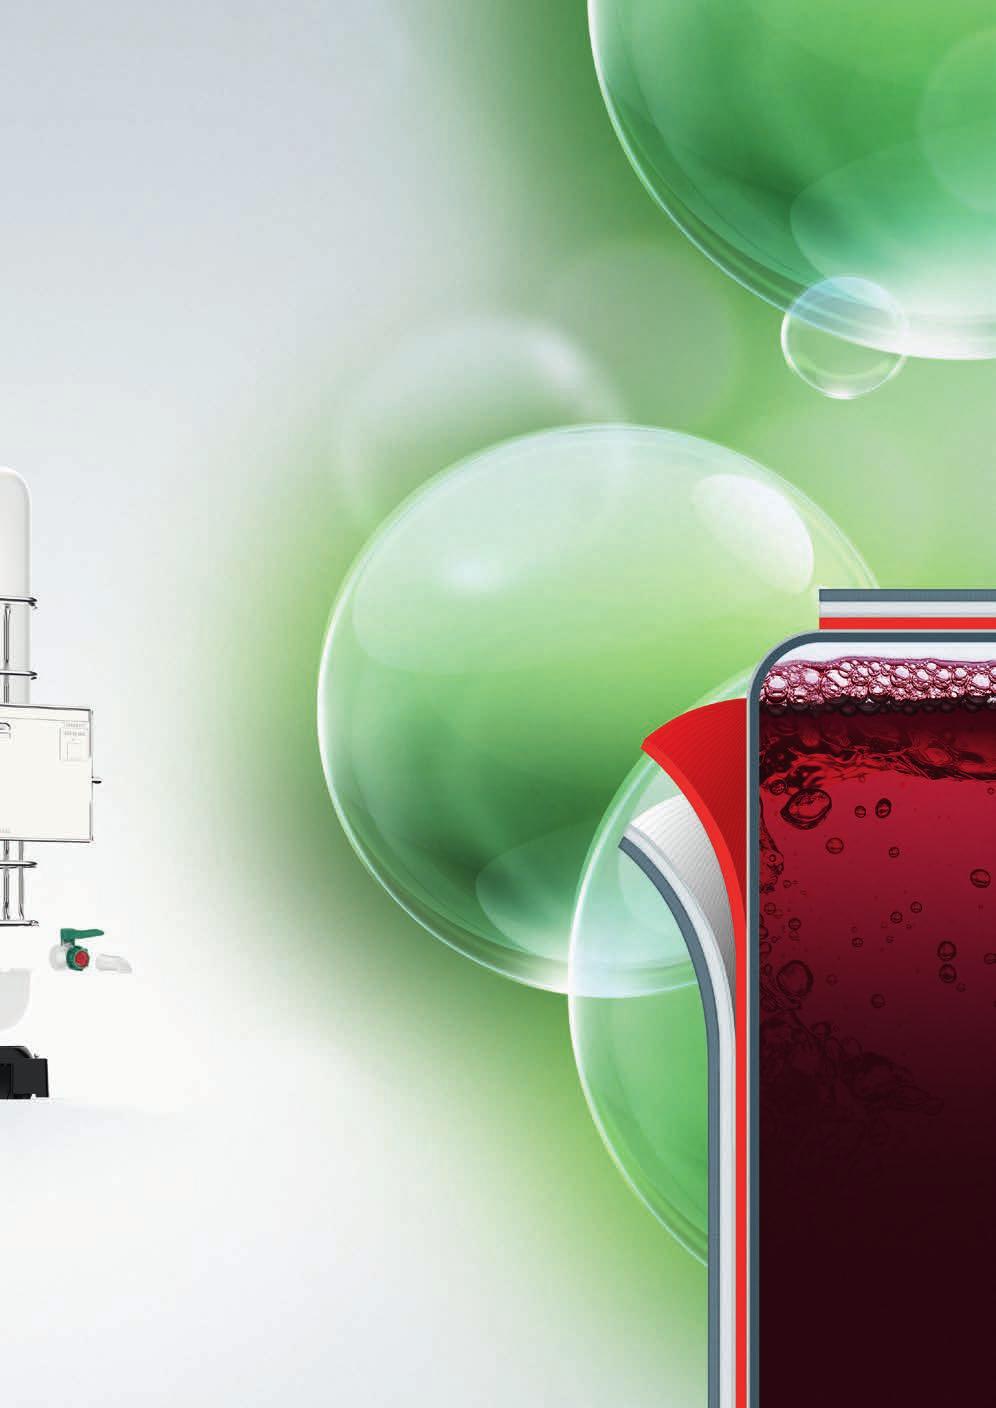 The EVOH barrier prevents the permeation in or out of oxygen and other gases, flavours and odours, and prevents the quality and the characteristics of the wine from being negatively affected.